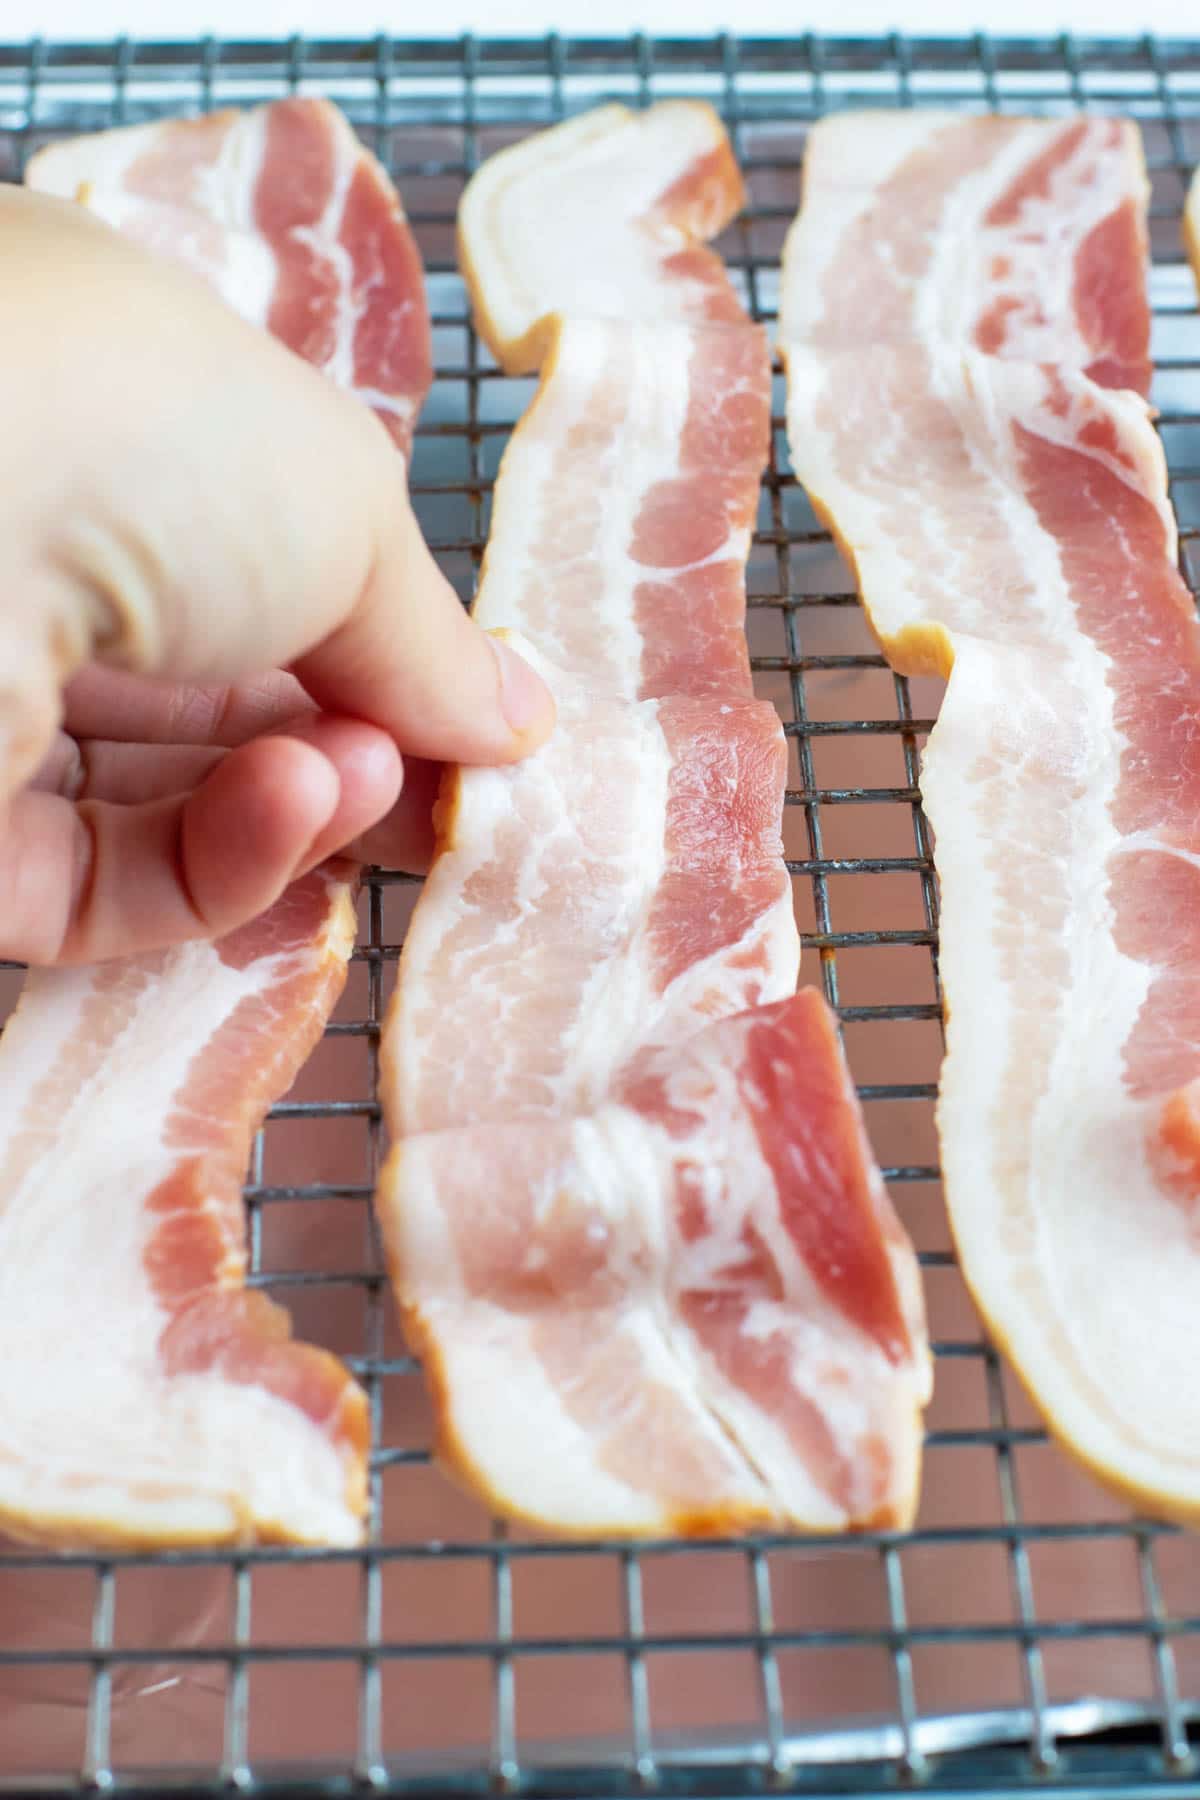 A hand roling a piece of bacon and showing how to cook bacon in the oven.